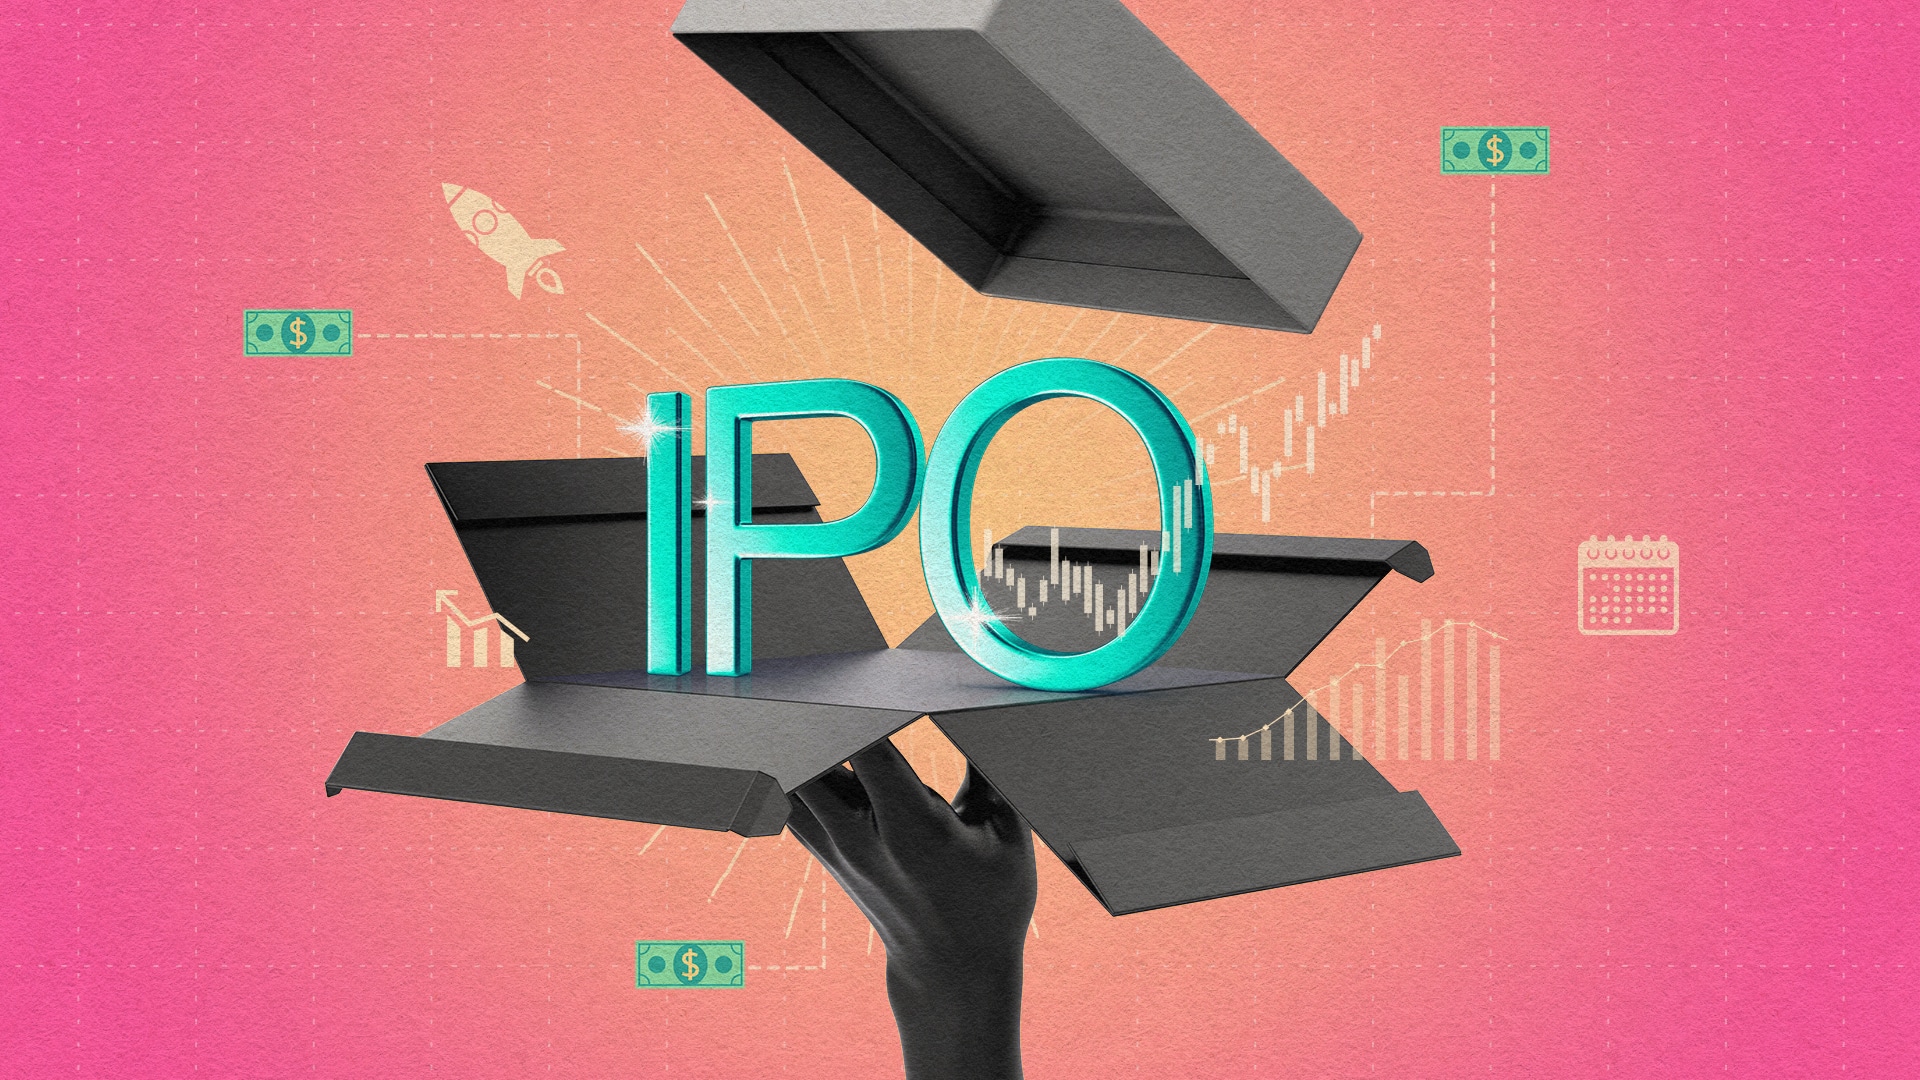 Illustration of the letters "IPO" along with financial imagery colourfully exploding out of a box.